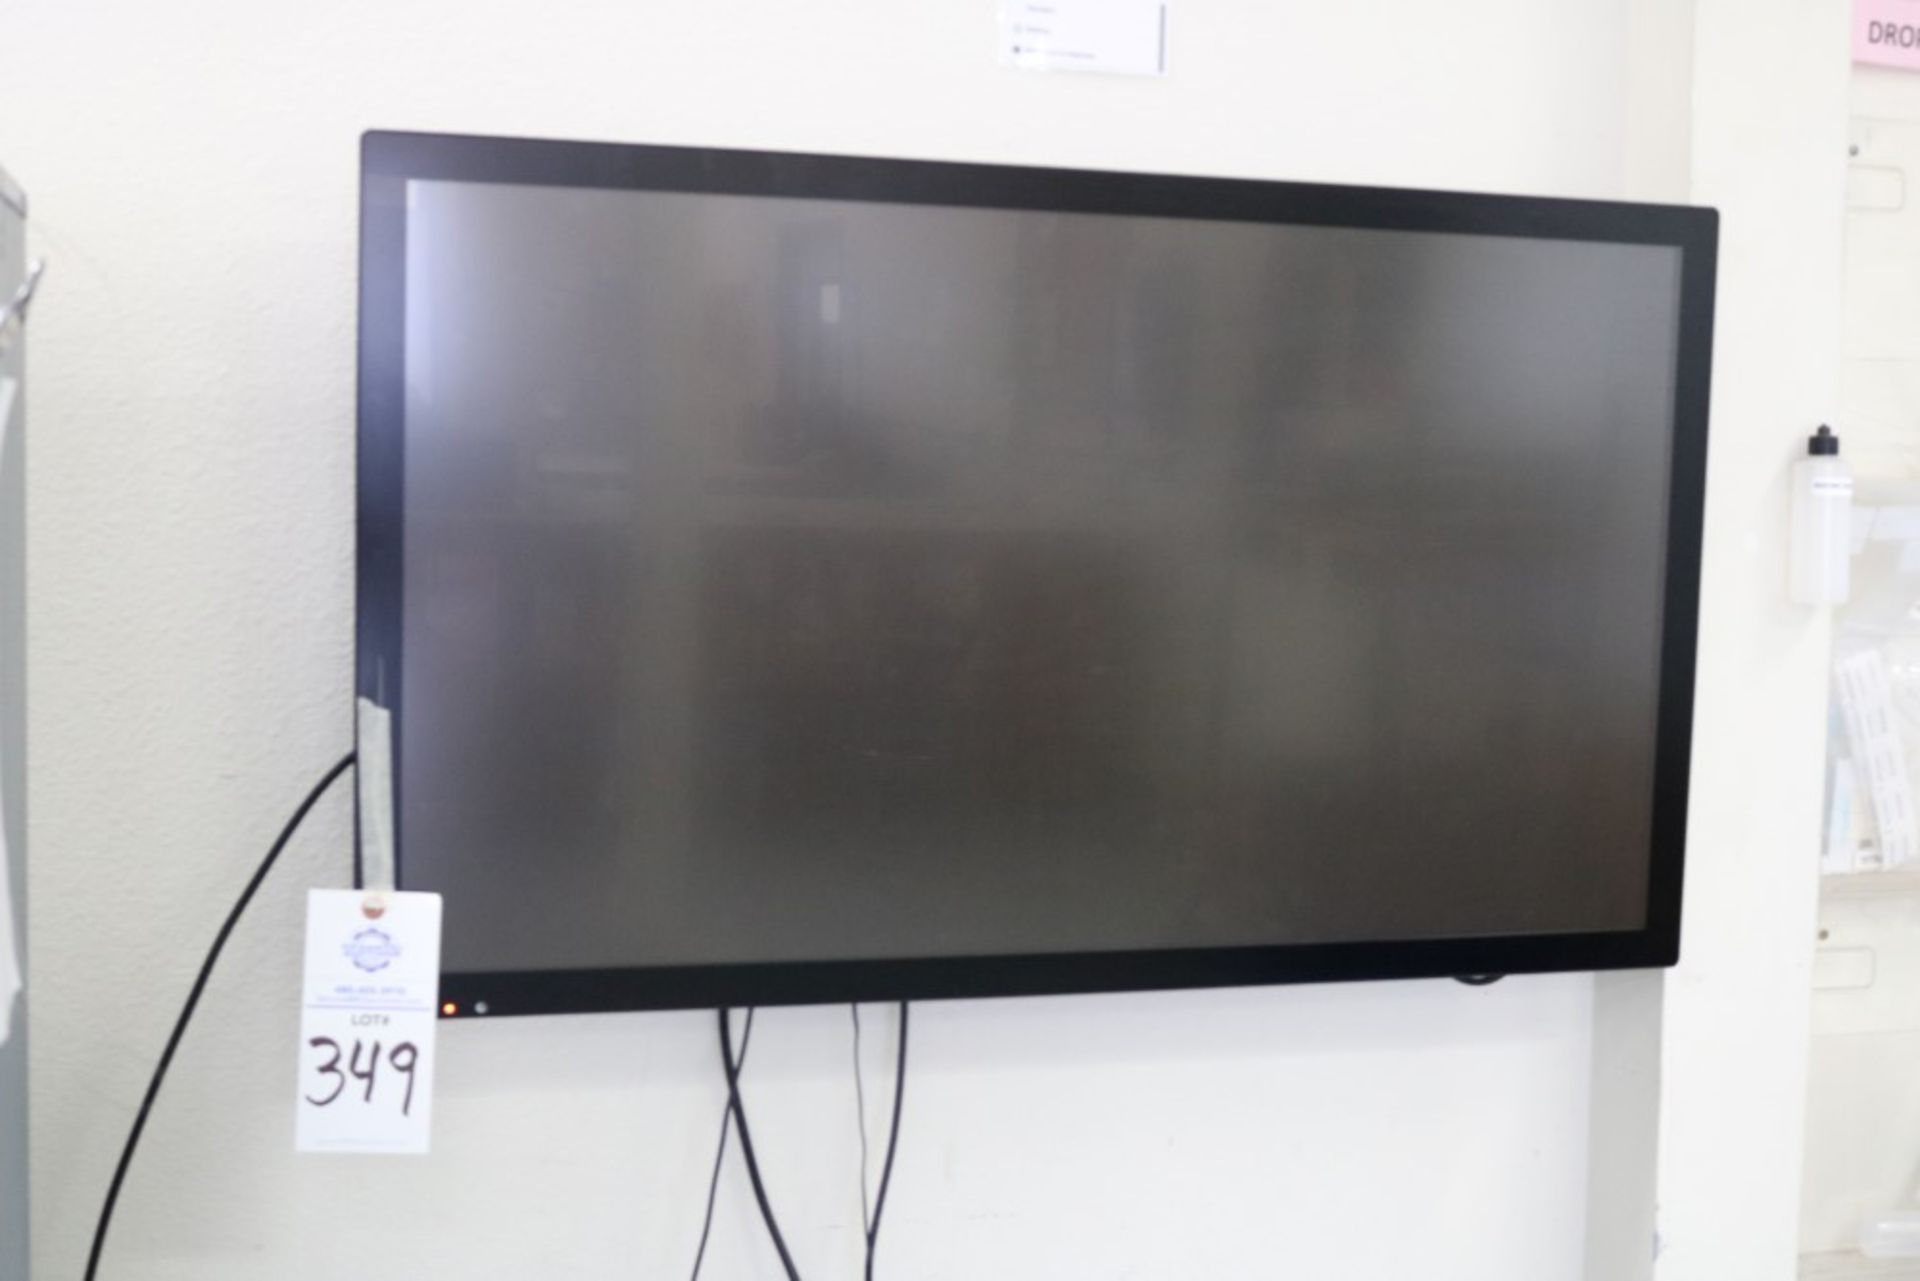 Sharp PN-401C Touchscreen On Flat Wall Mount, 42" Screen Size - Image 3 of 4